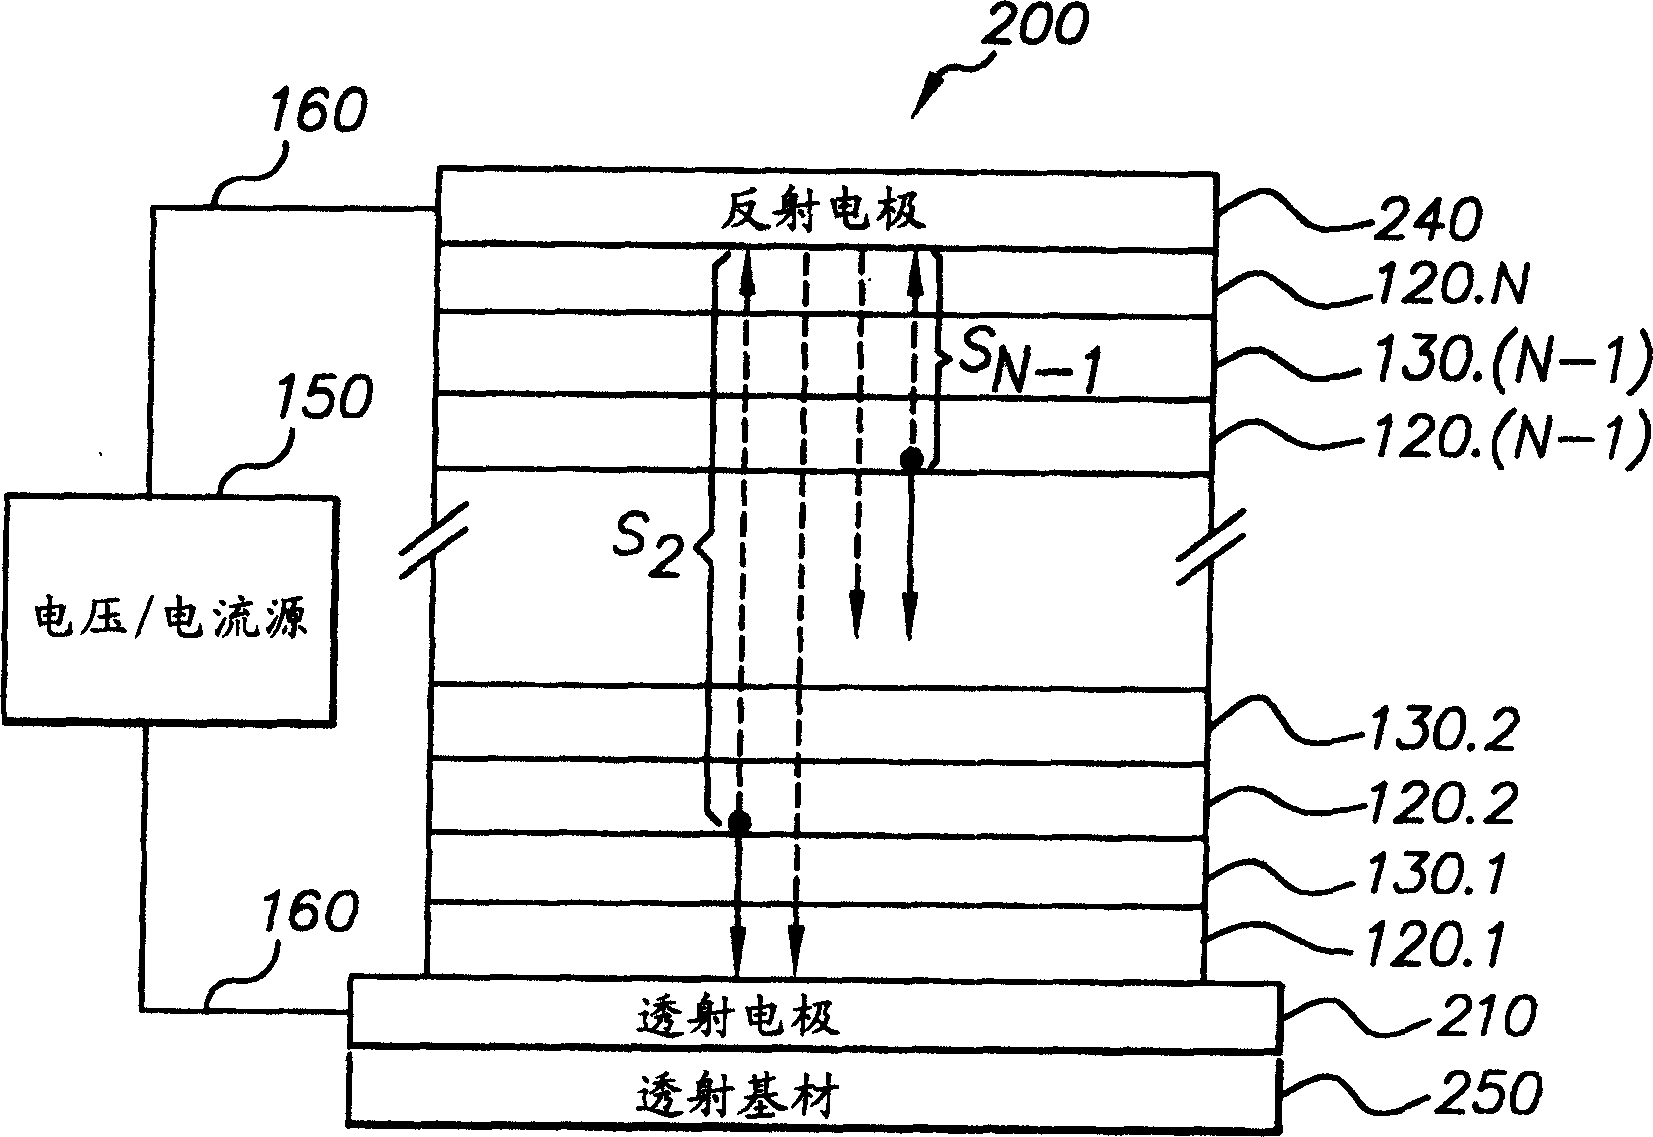 Cascaded organic electroluminescent device having connecting units with n-type and p-type organic layers